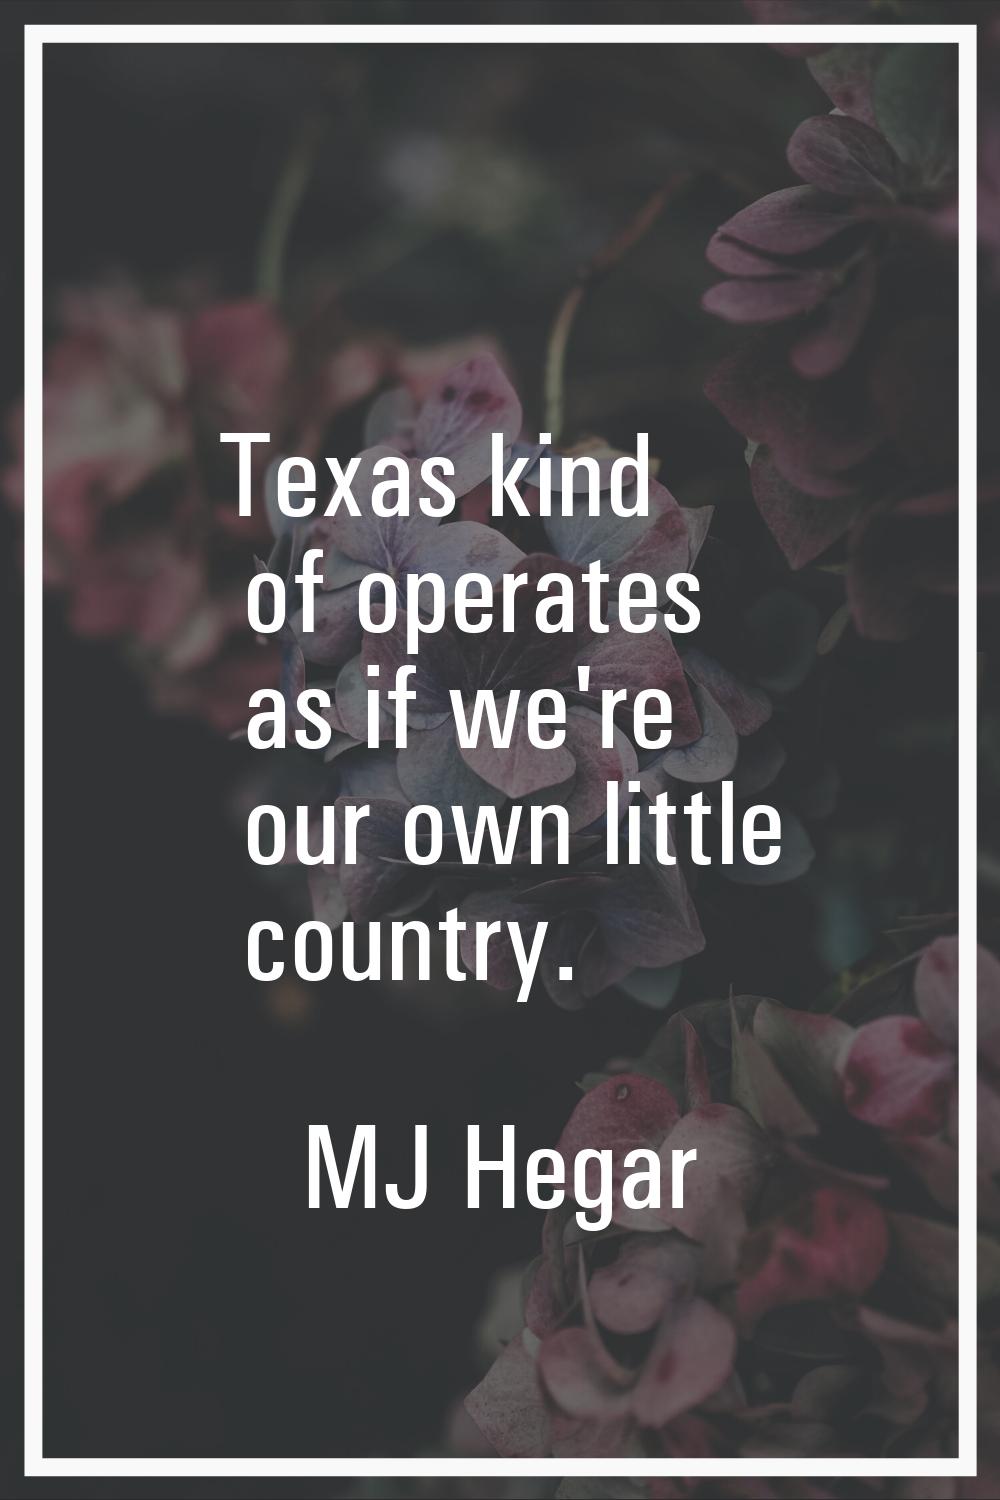 Texas kind of operates as if we're our own little country.